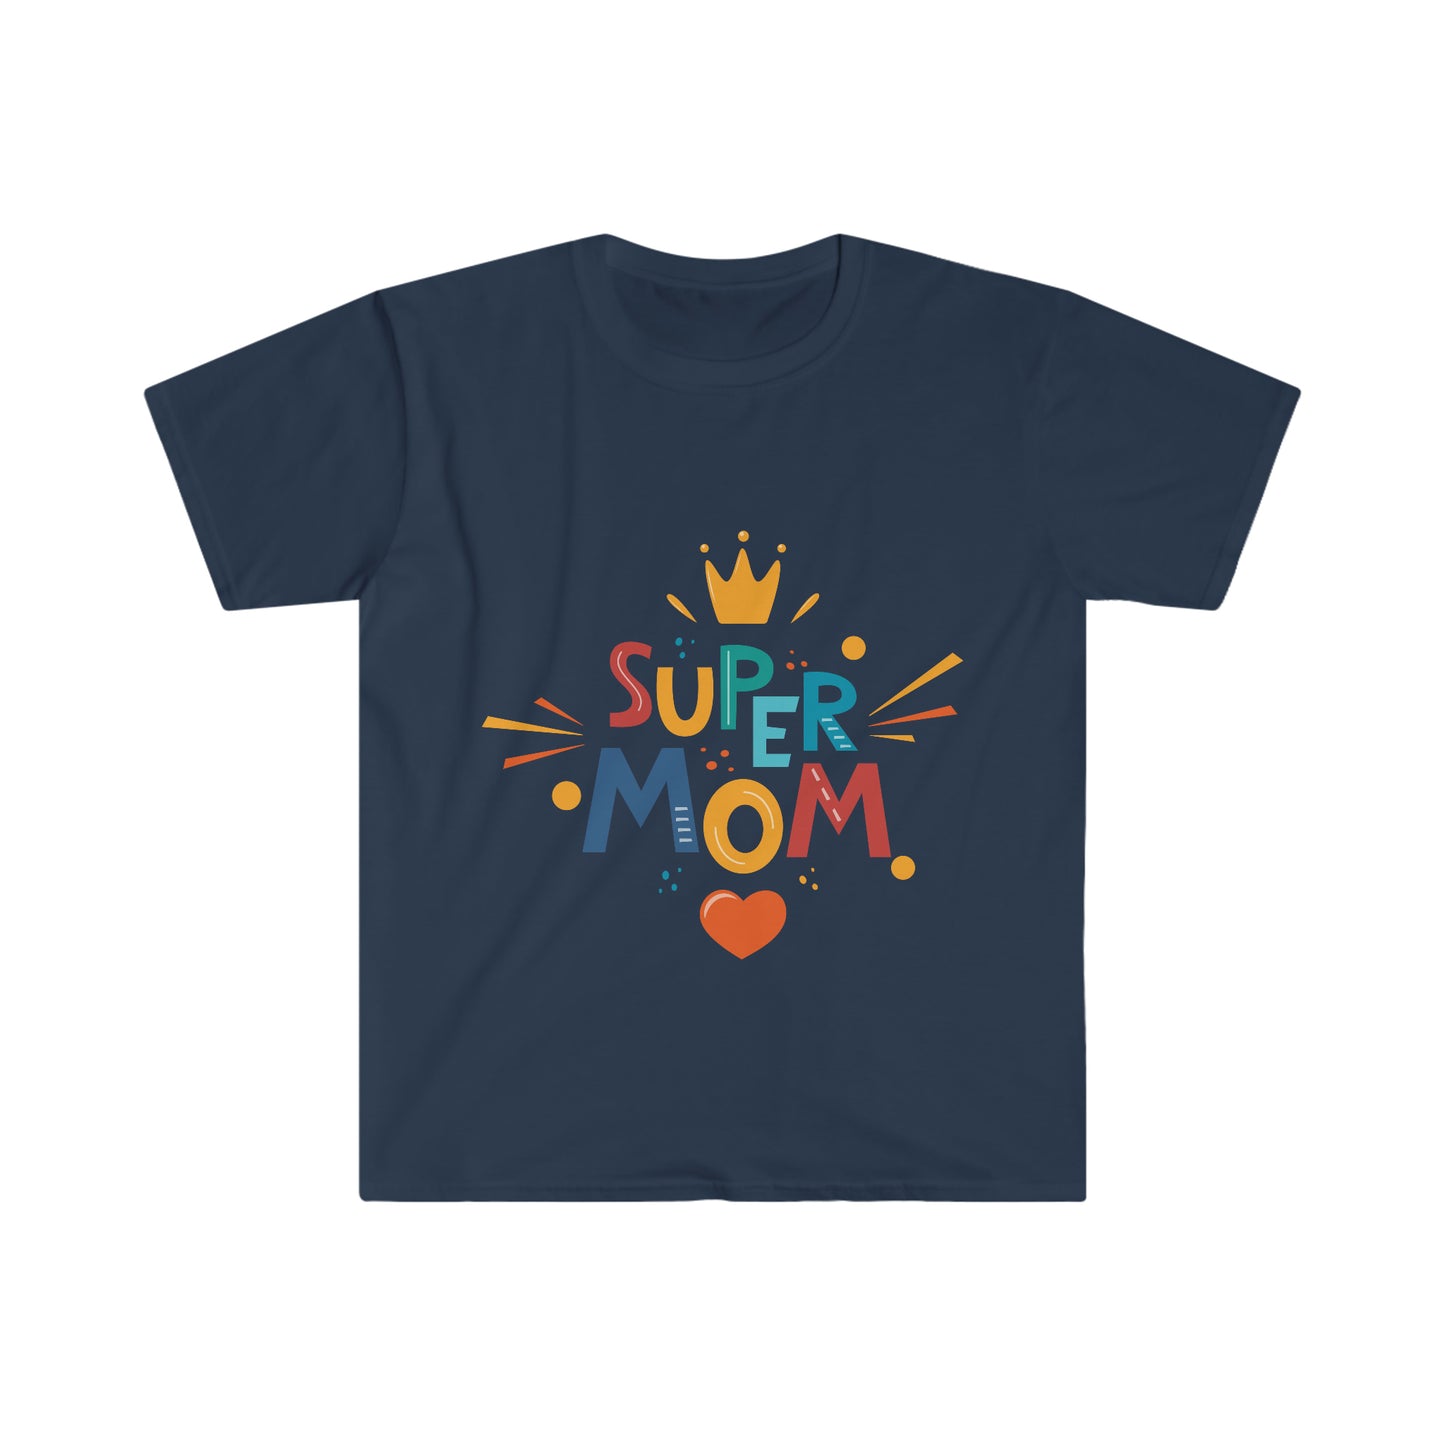 Looking for the perfect Mother's Day gift? Surprise Mom with our 100% cotton Super Mom navy softstyle t-shirt